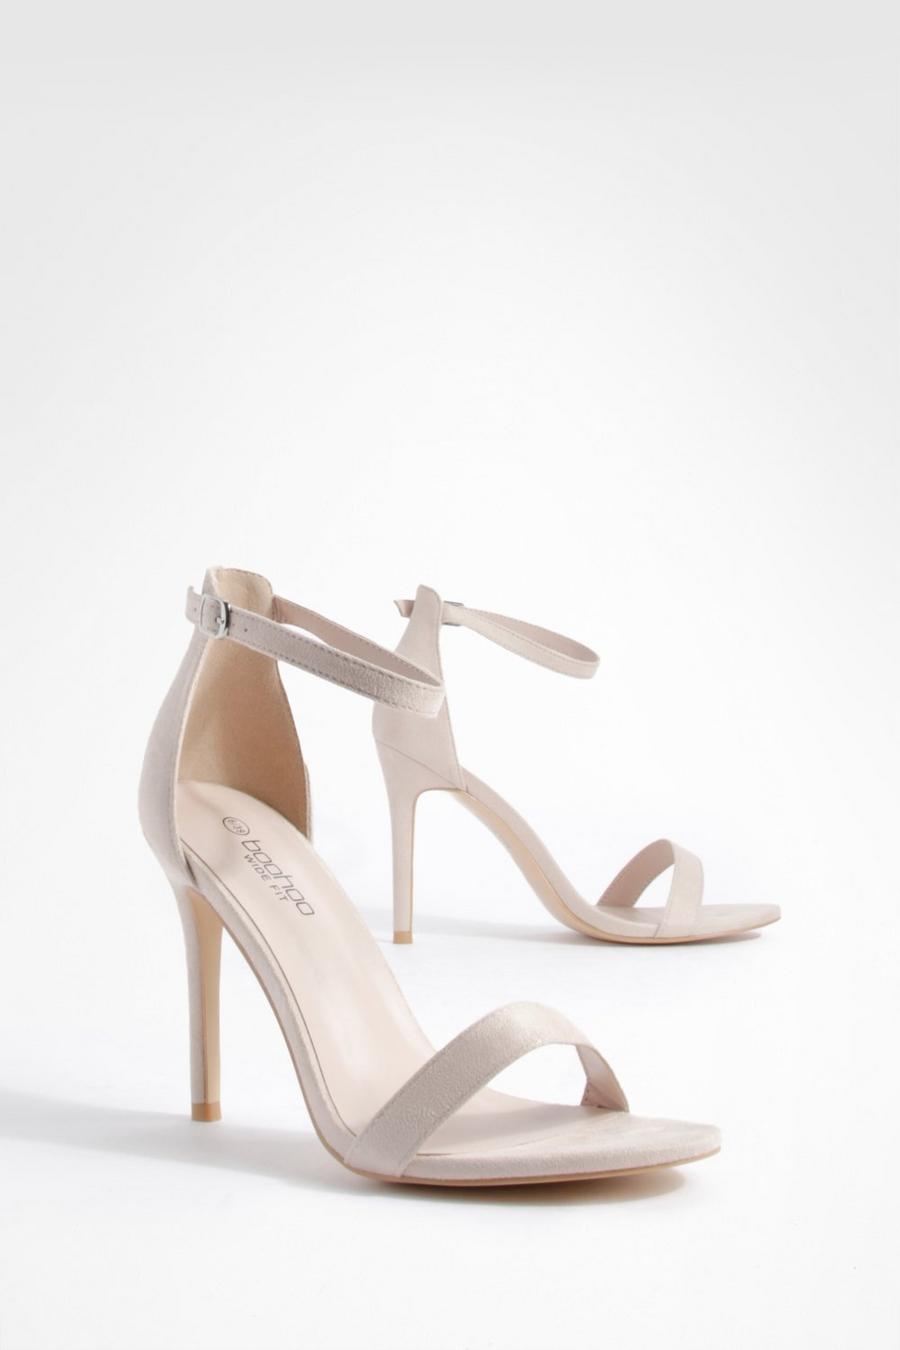 Blush pink Wide Fit Barely There Basic Heels   